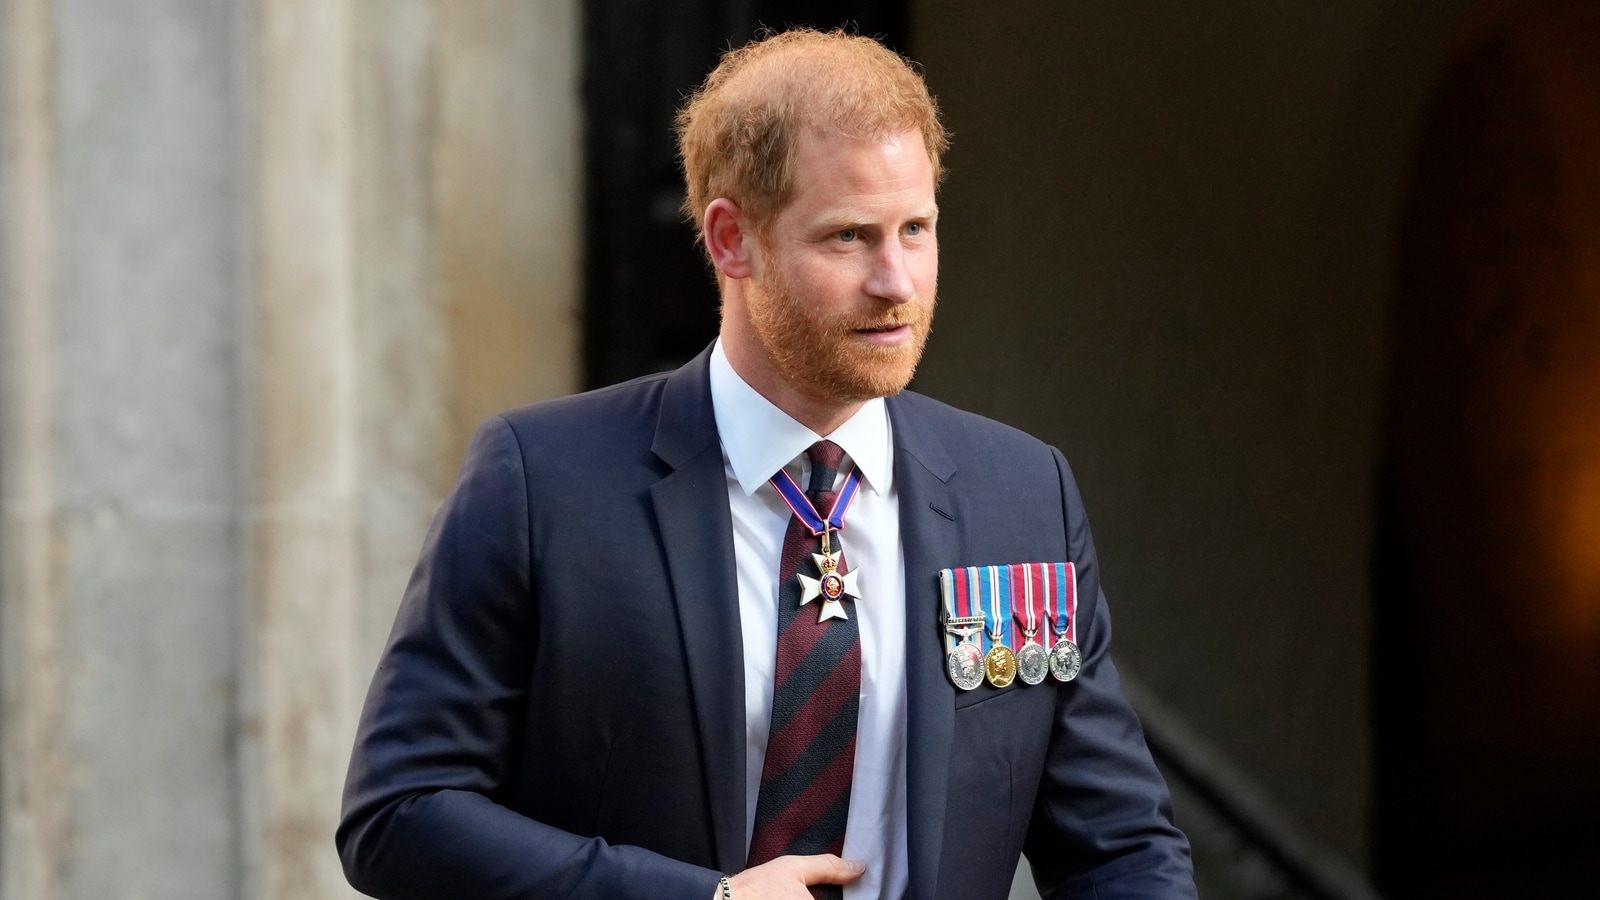 Prince Harry is ‘hurt’ due to ‘increasing weight of…’